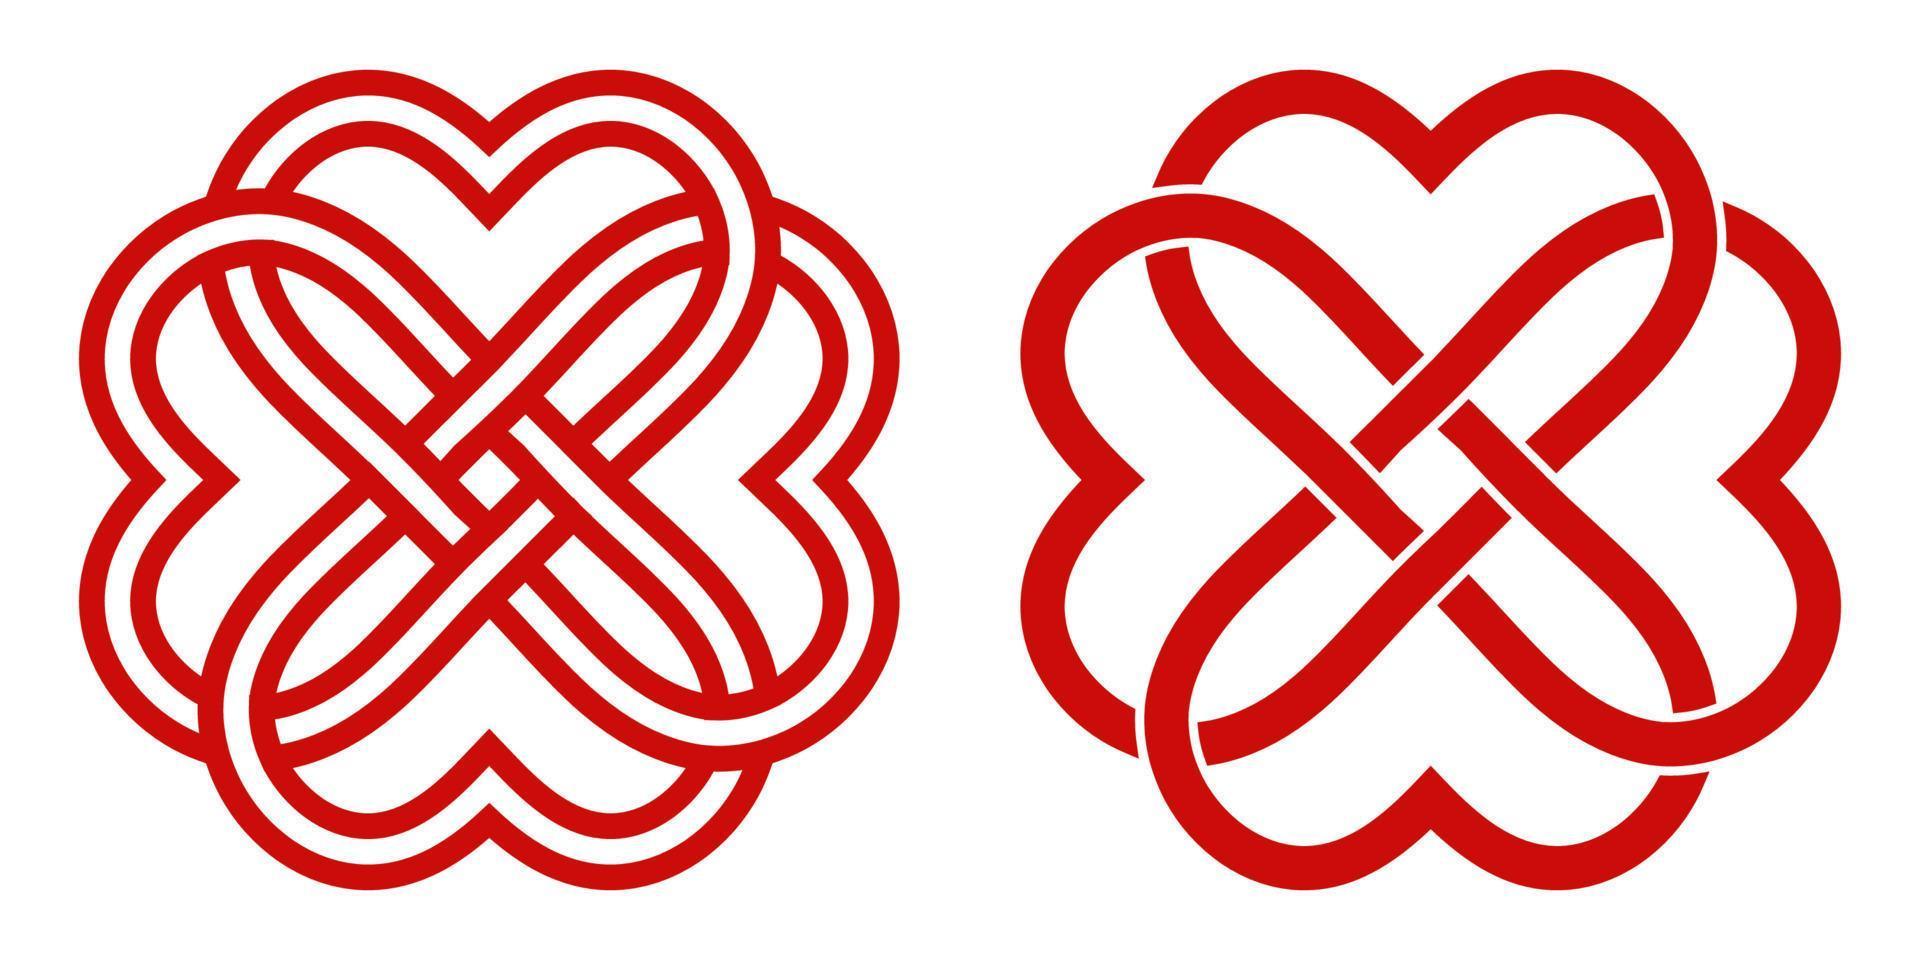 Celtic knot of red hearts in the shape of a flower, vector knot hearts symbol endless love mutual understanding and friendship